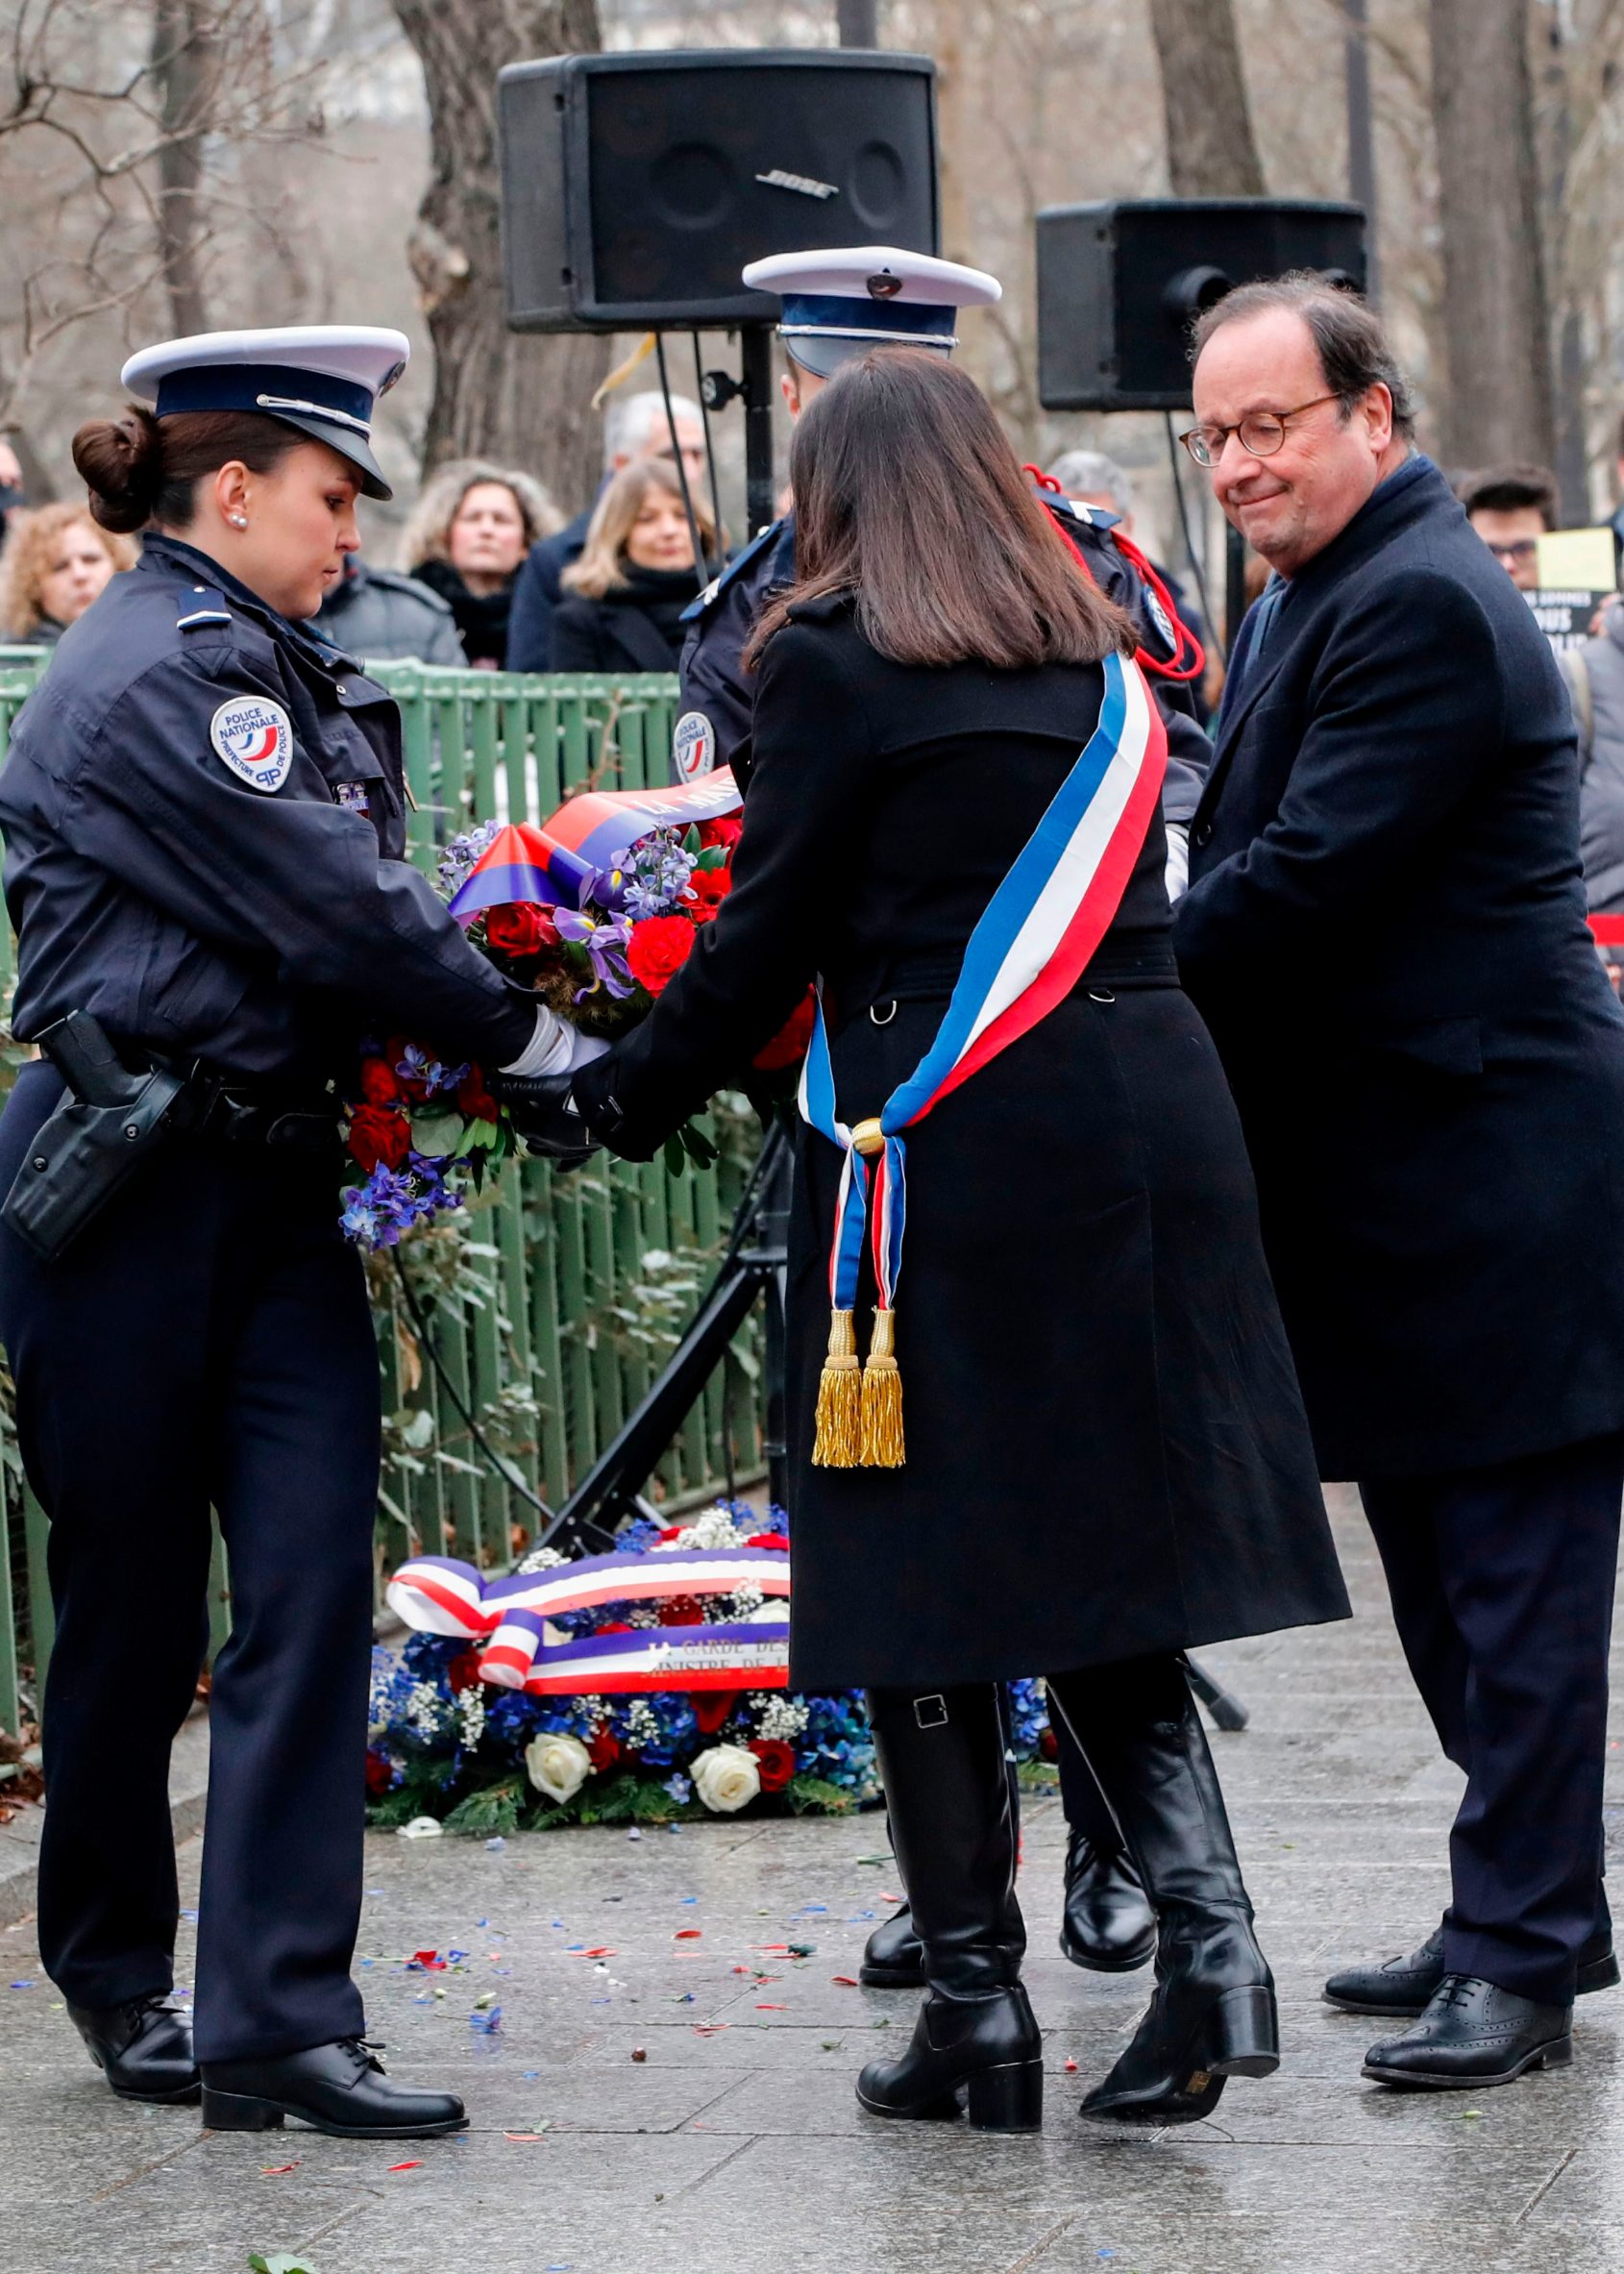 Former French President Francois Hollande and Mayor of Paris Anne Hidalgo lay a wreath on January 7, 2020 in Paris, in tribute to French police officer Ahmed Merabet who was killed by jihadist terrorists the same day of the attack of the satirical magazine Charlie Hebdo that killed 12 people, five years ago. - The attack on the satirical magazine Charlie Hebdo -- with its long history of mocking Islam and other religions -- was the first in a series of assaults that have claimed more than 250 lives since January 7, 2015, mostly at the hands of young French-born jihadists. (Photo by FRANCOIS GUILLOT / AFP)